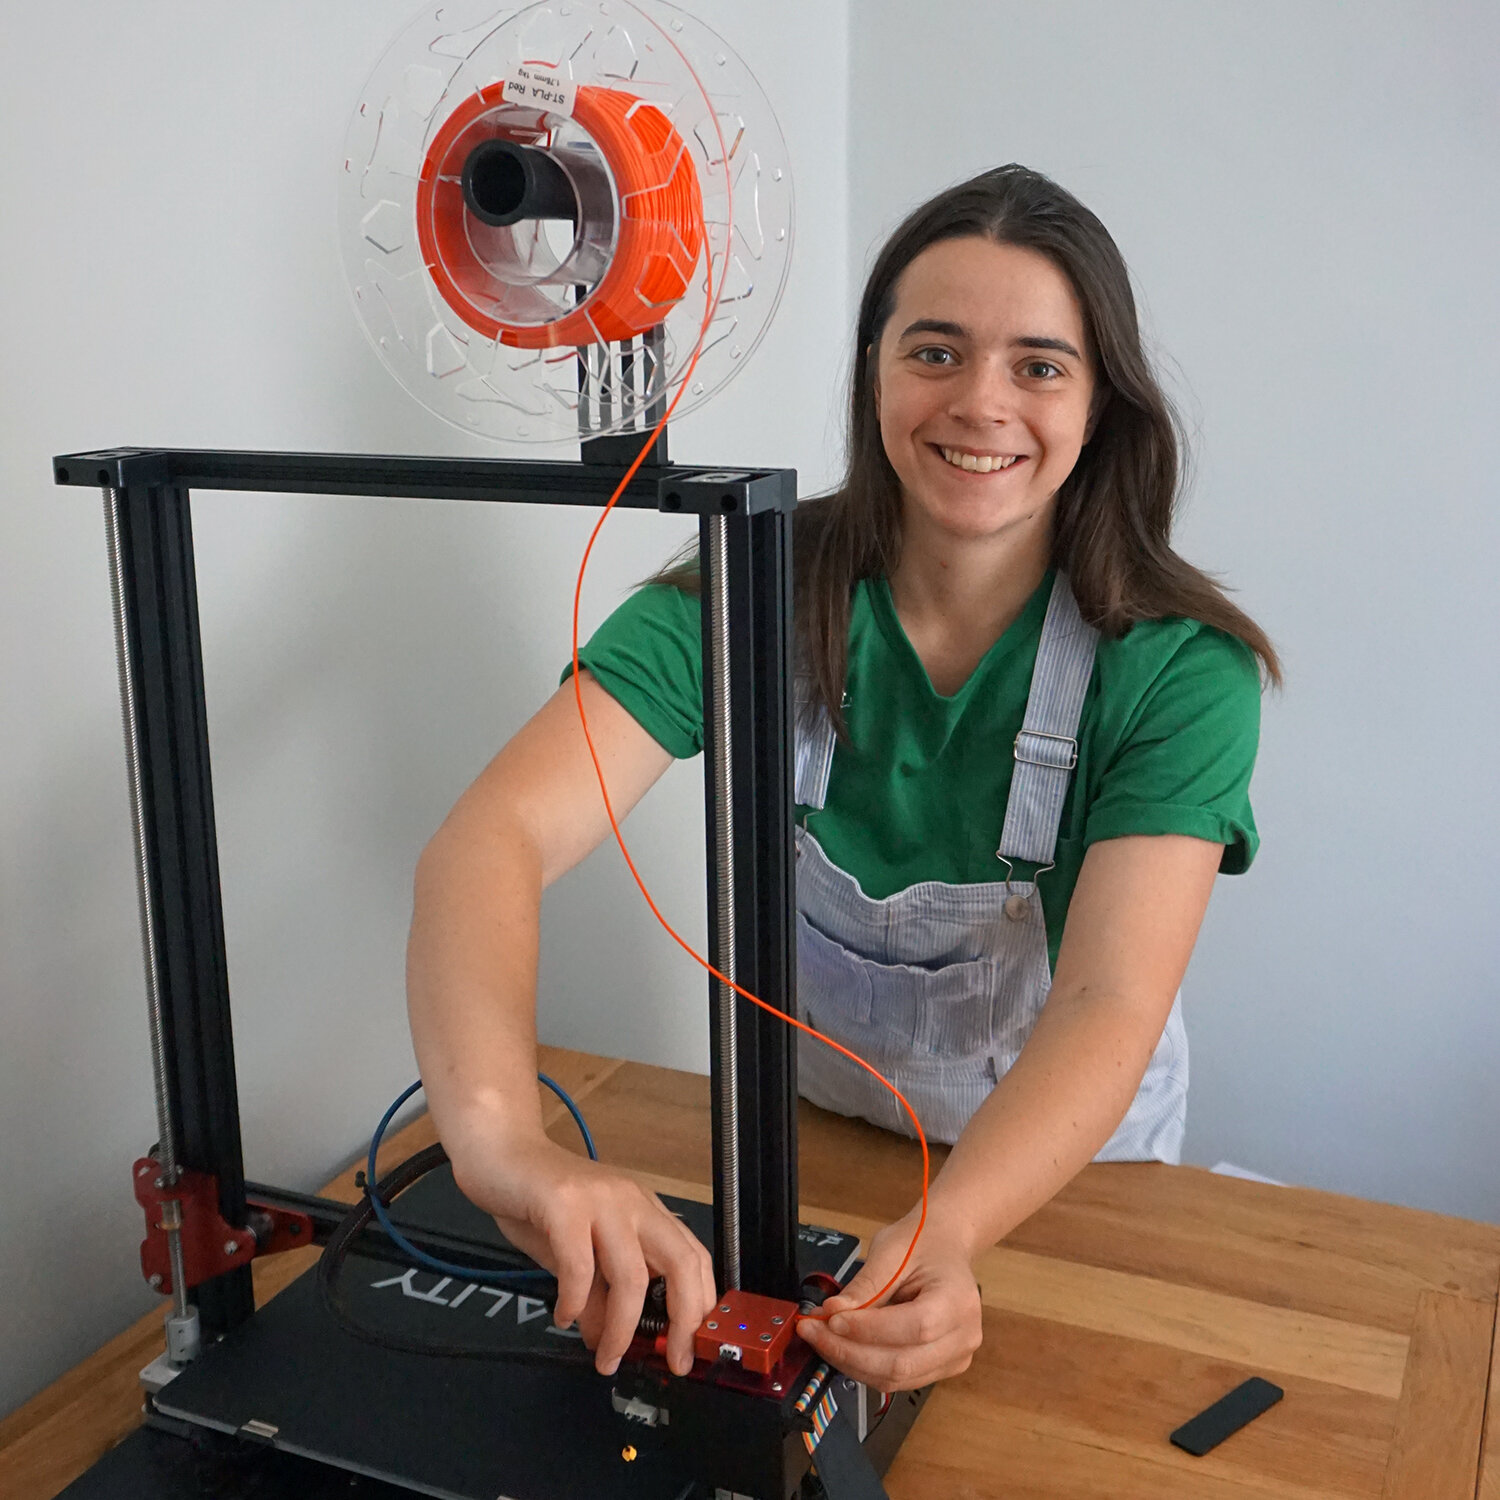 Amy Ruffley with 3D printer